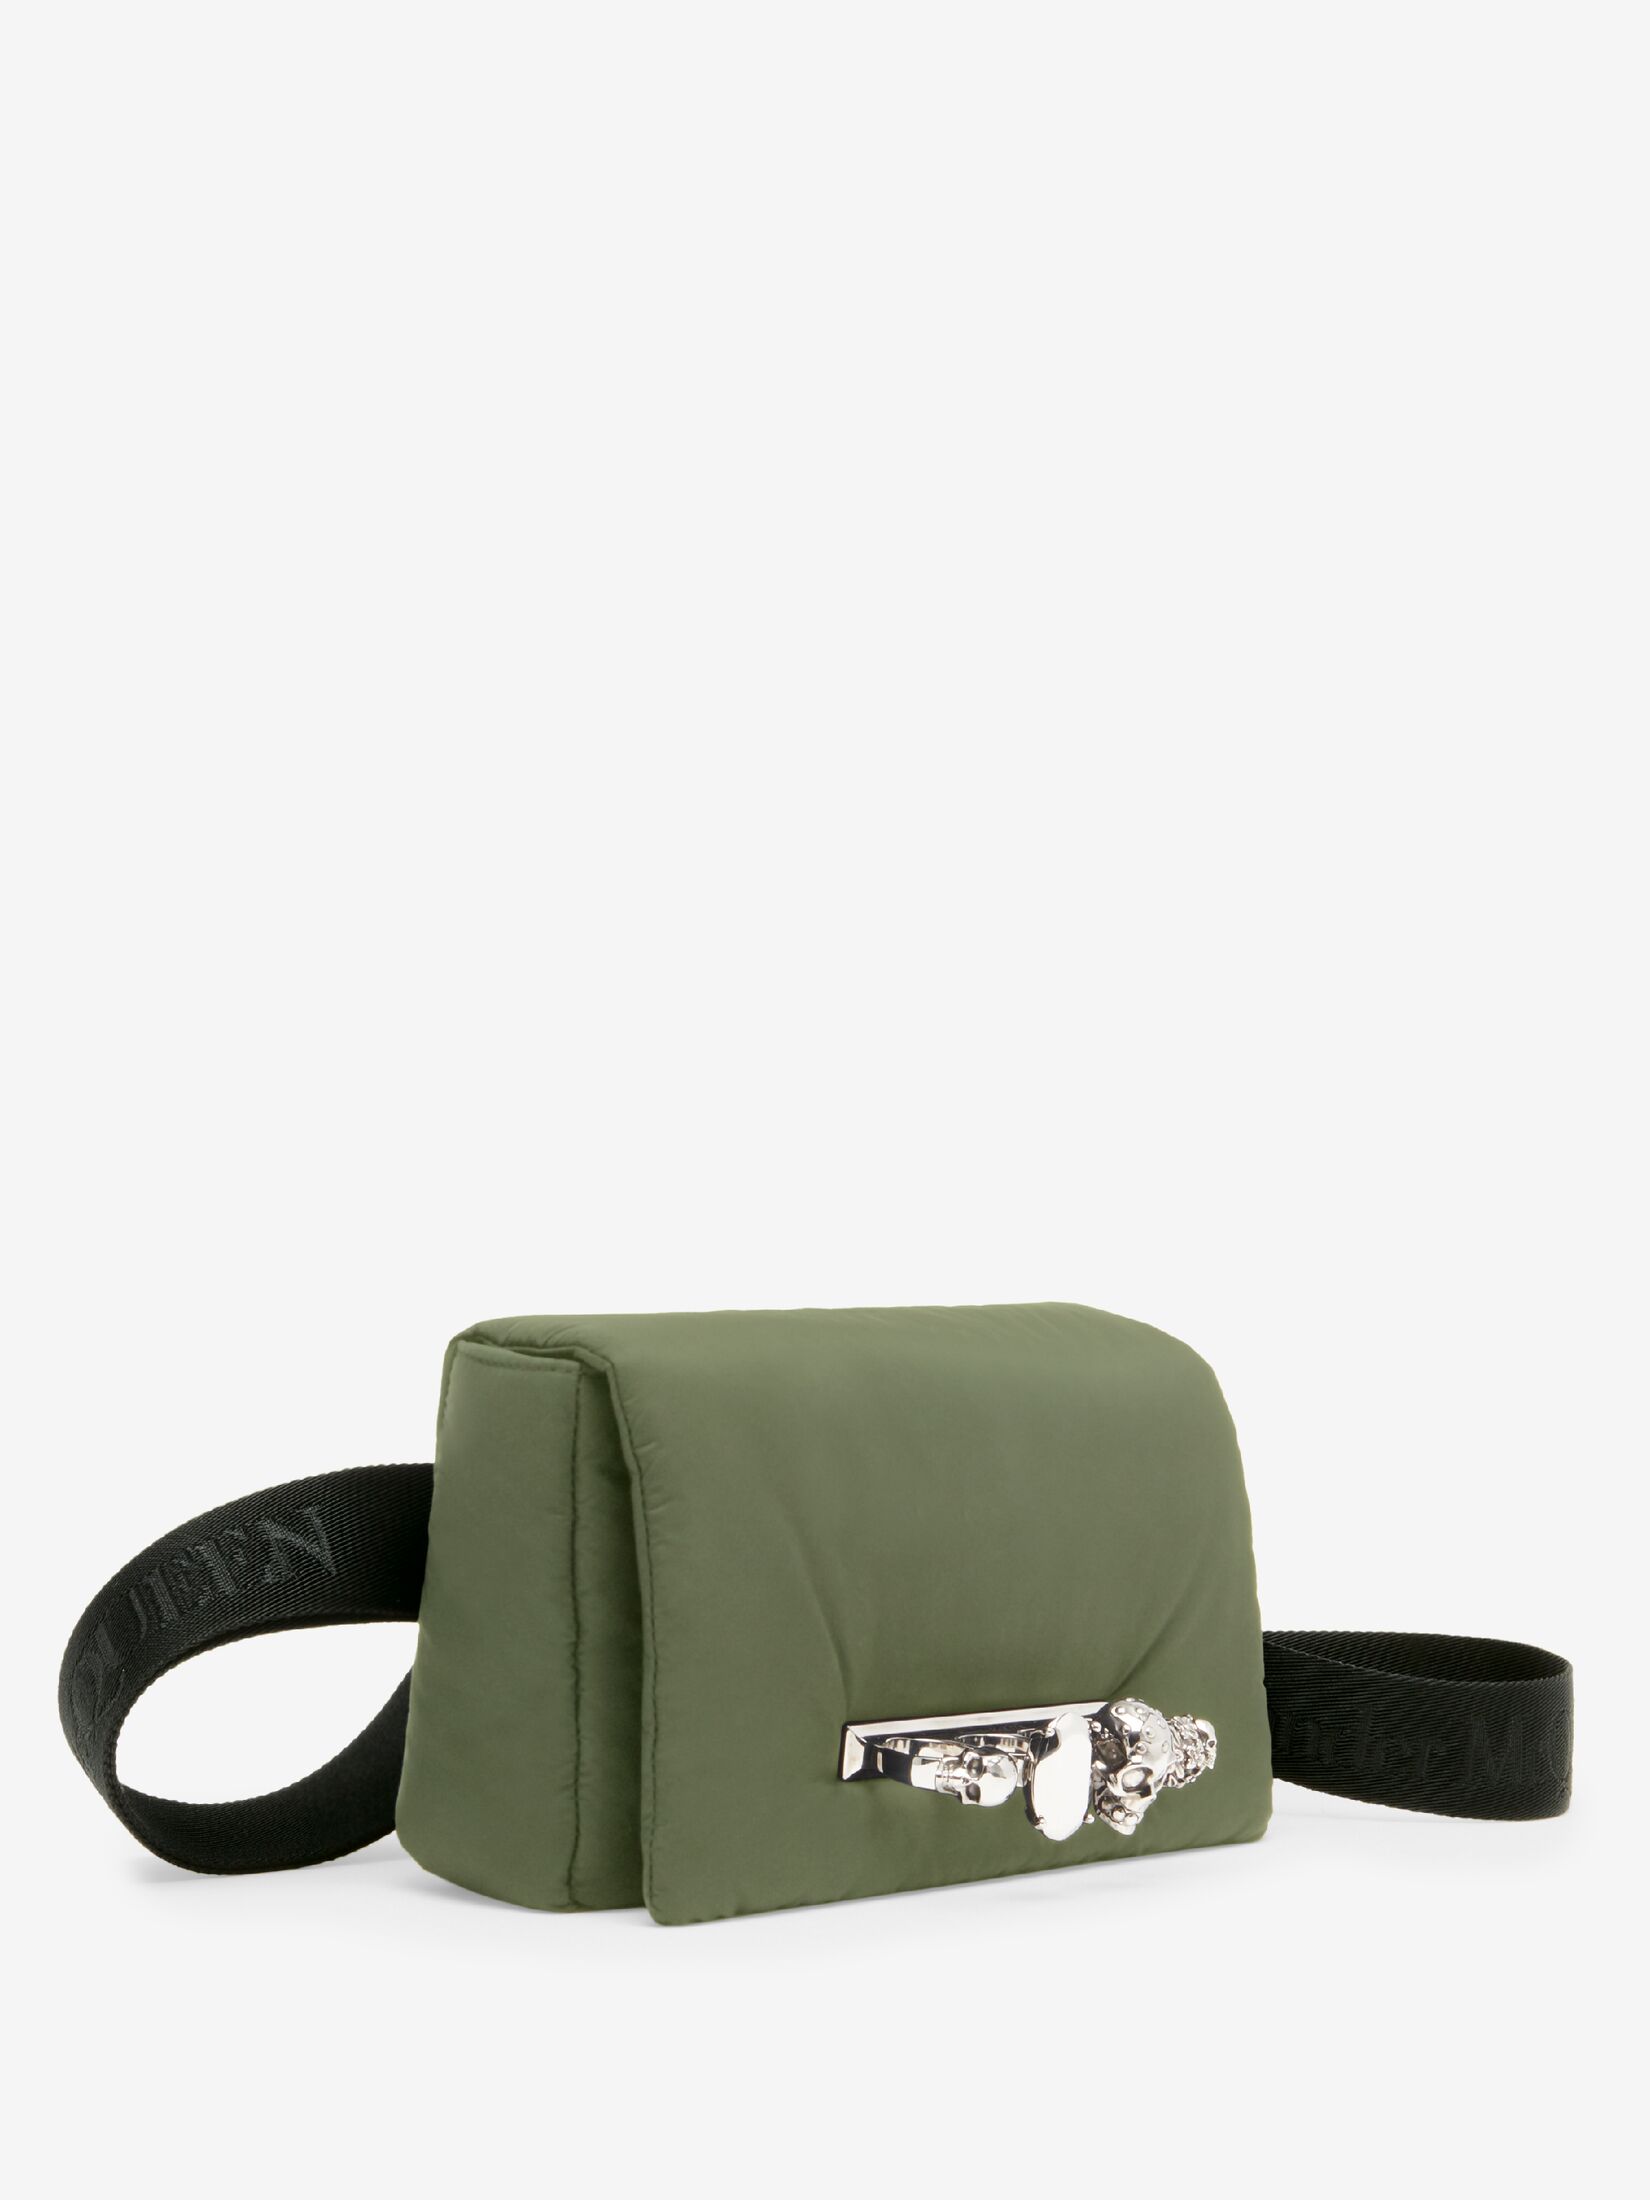 The Puffy Knuckle Bum Bag